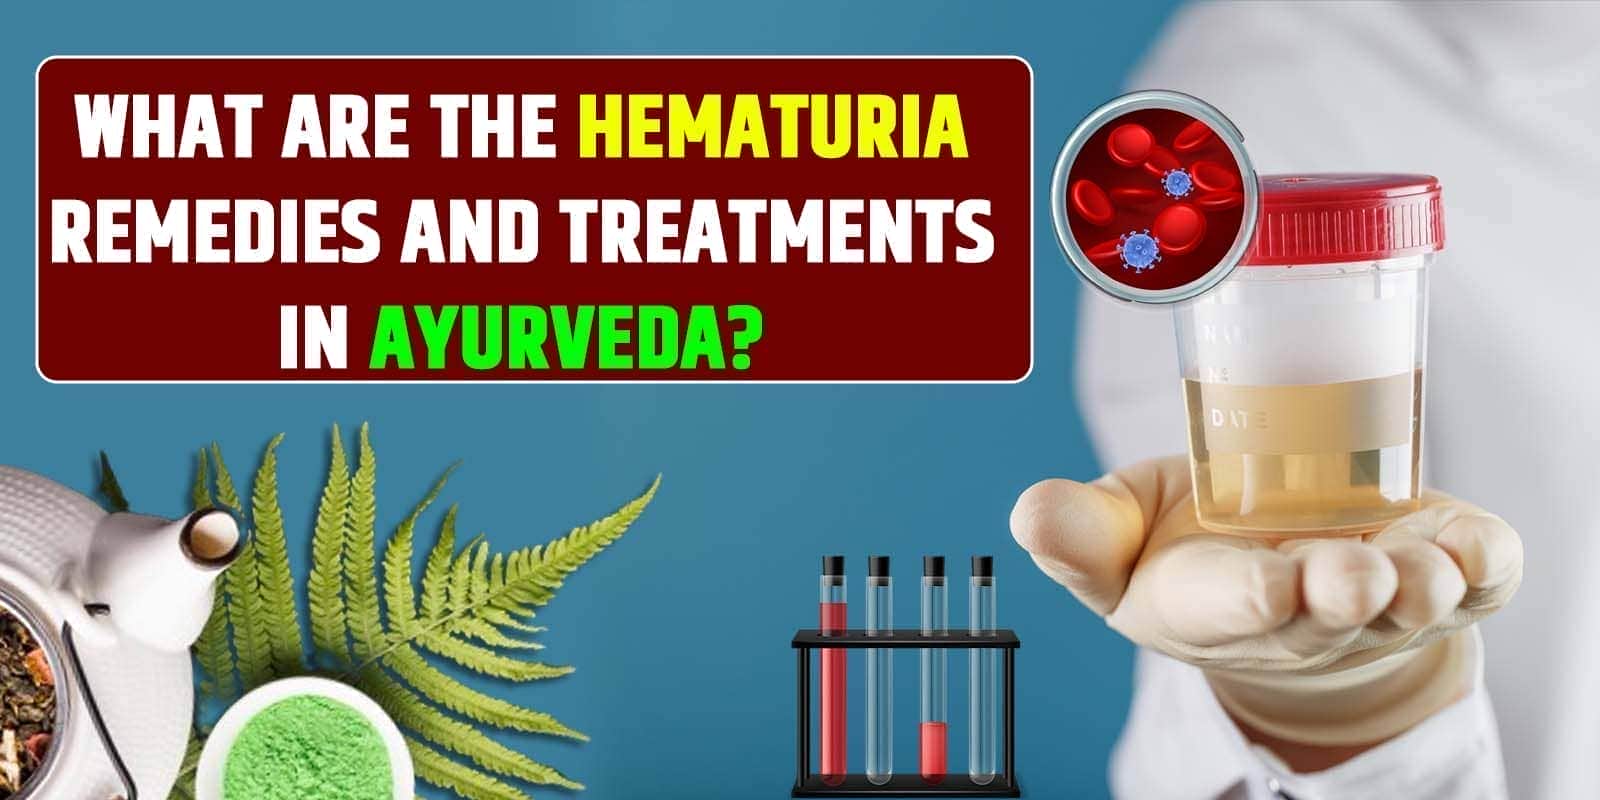 What are the Hematuria remedies and treatments in Ayurveda?